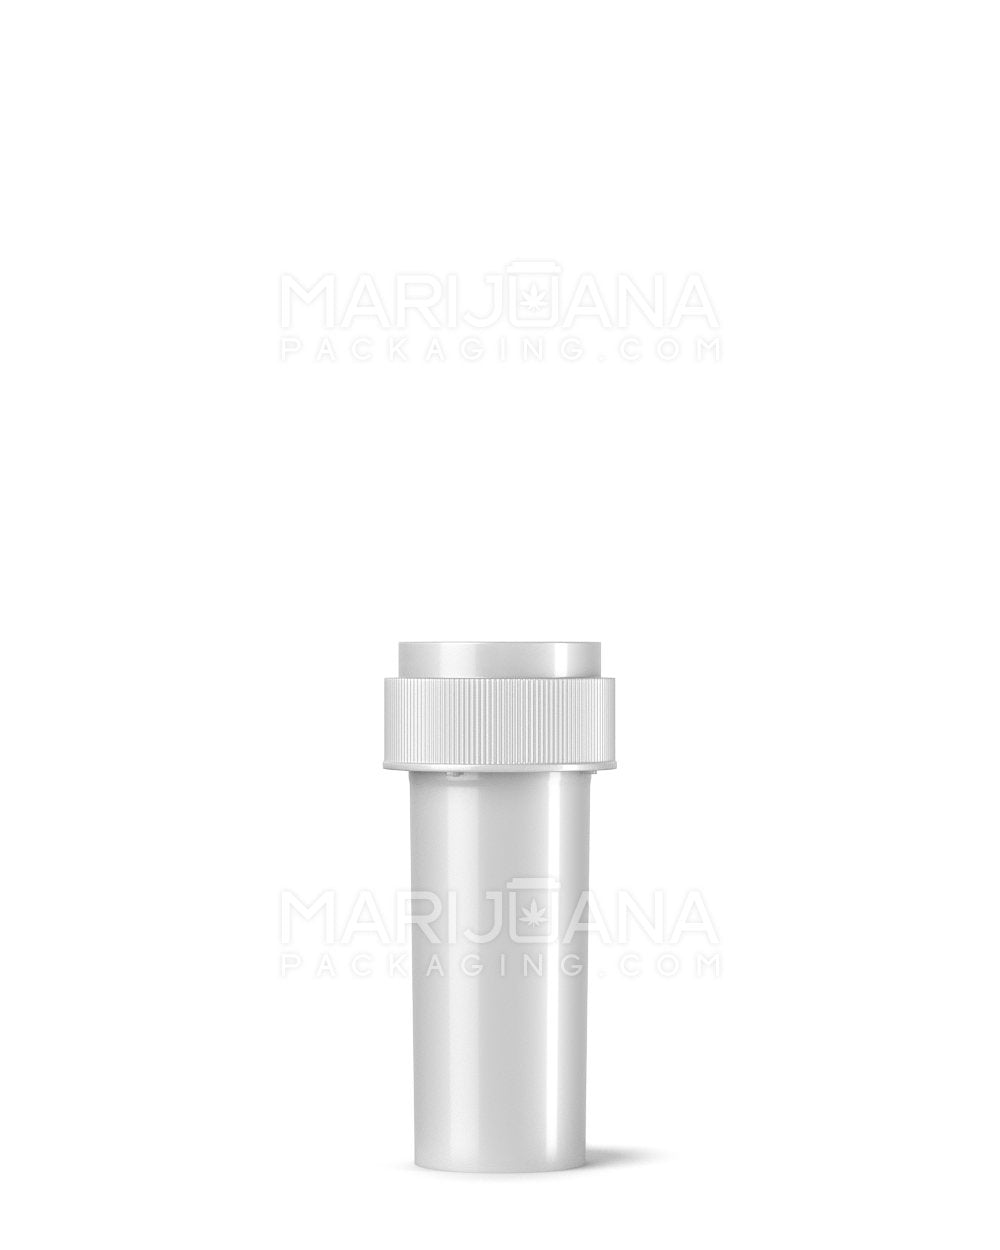 Child Resistant Opaque Silver Blank Reversible Cap Vials | 8dr - 1g | Sample - 1